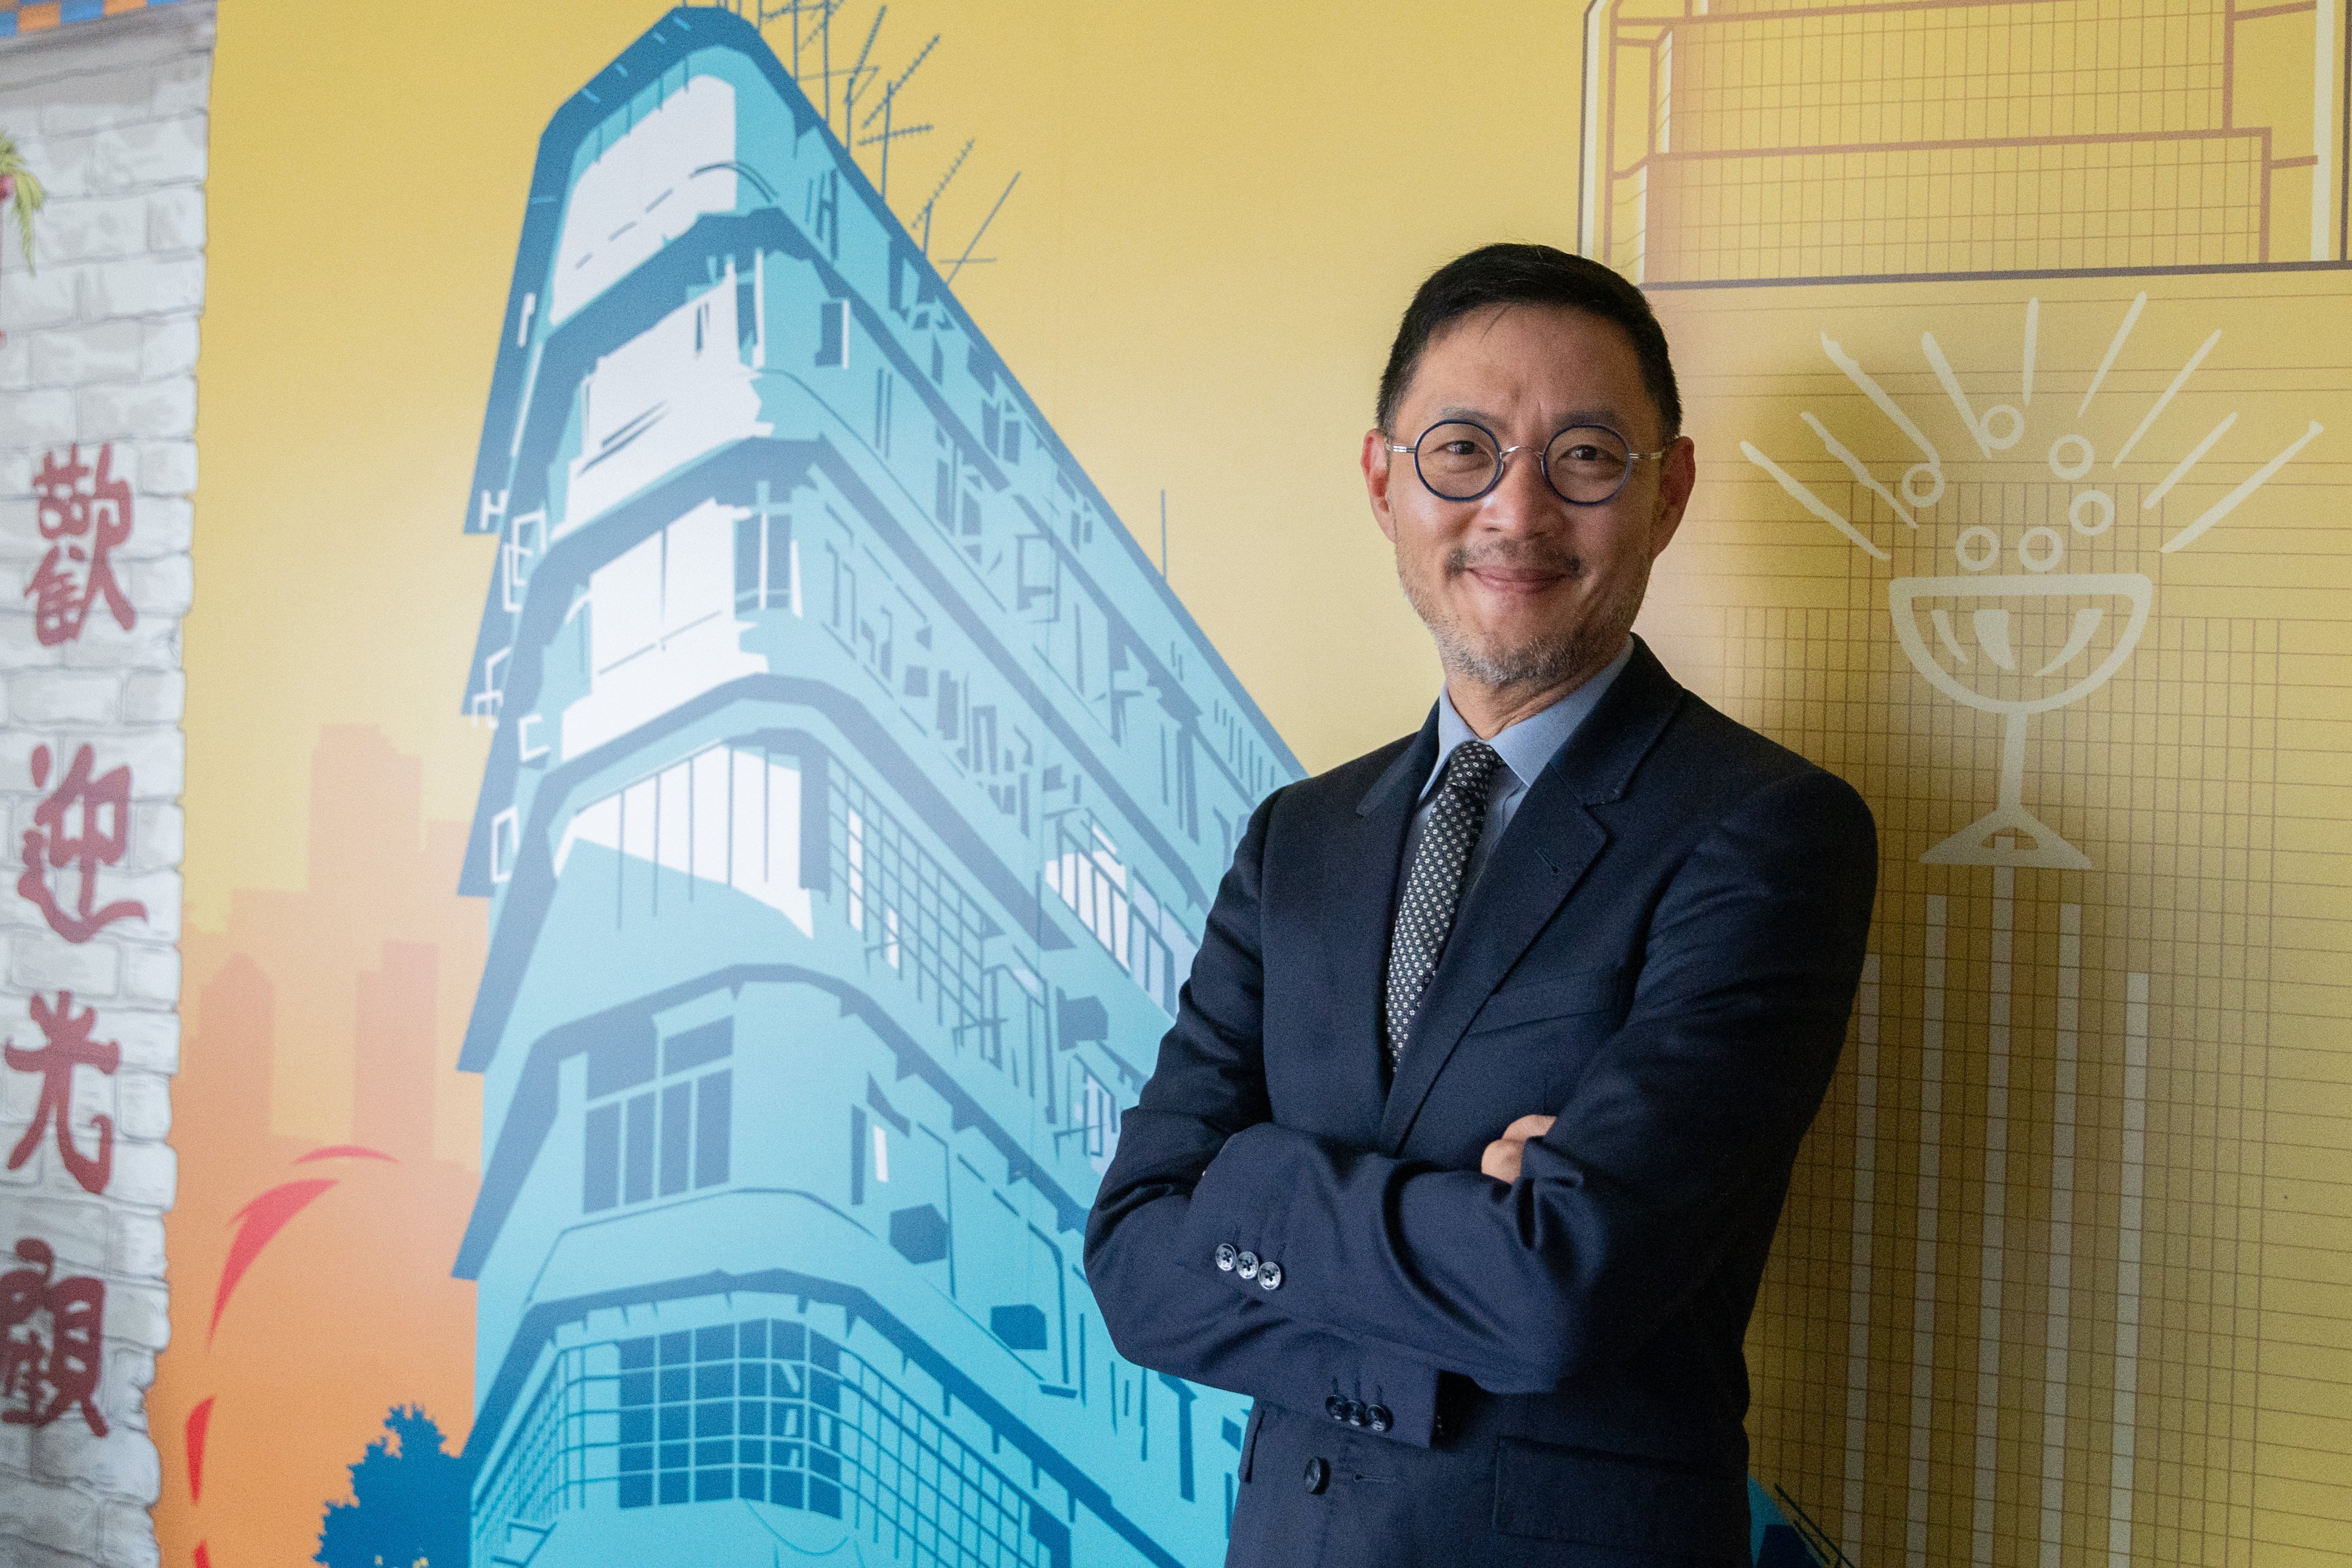 Dr Jack Lau, President of the Qatar Science and Technology Park, during an interview at SCMP’s office in Causeway Bay on March 28. Photo: Nathan Tsui